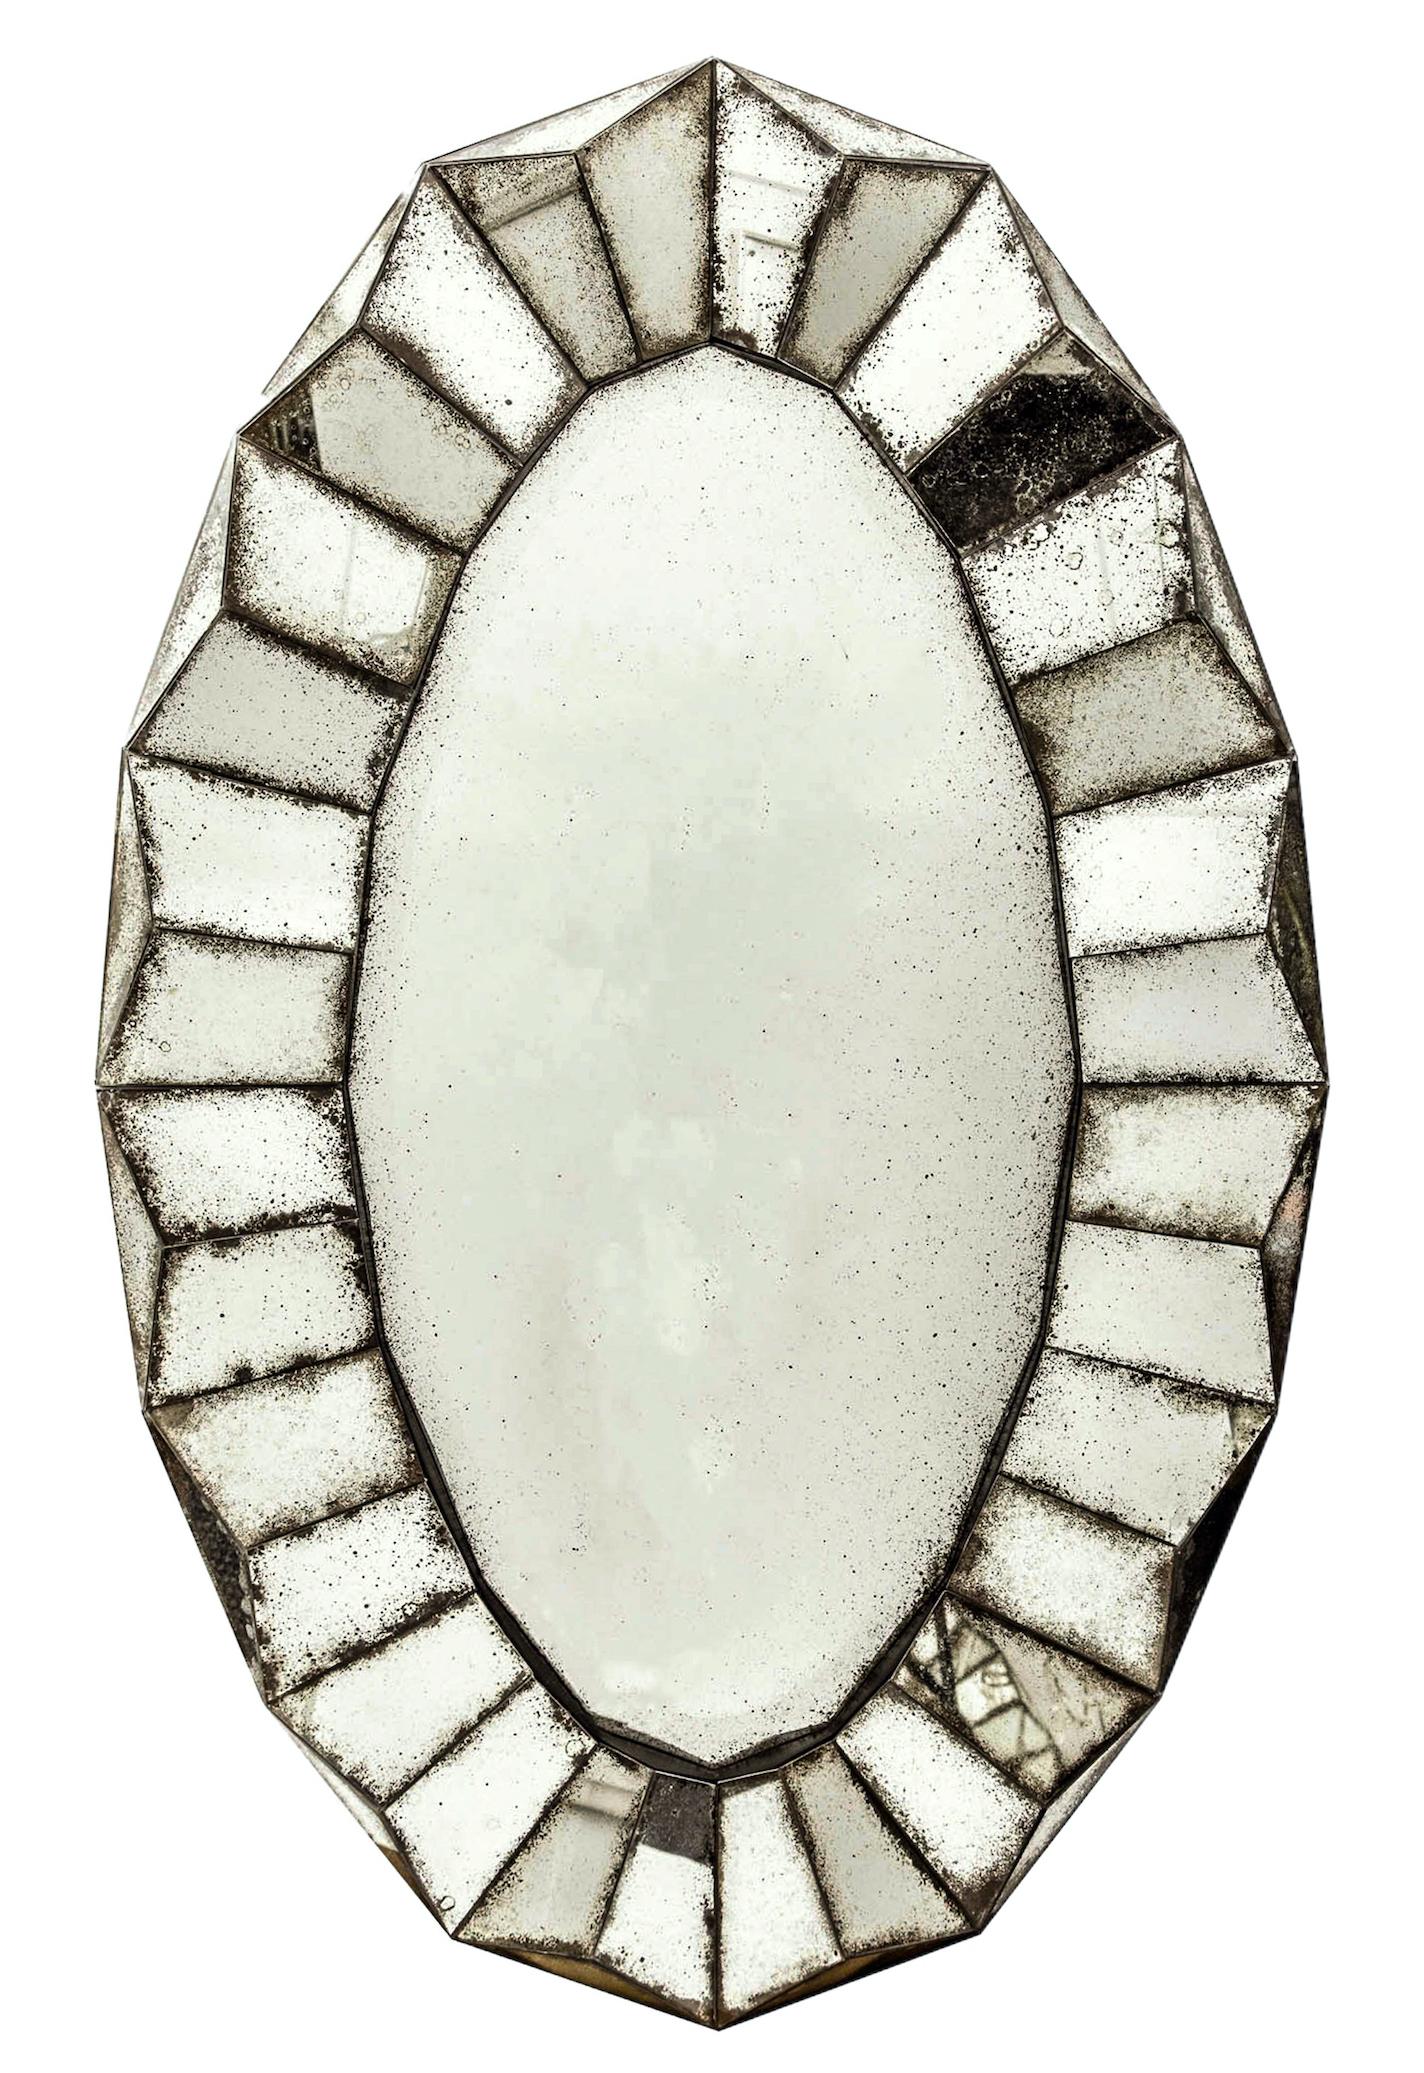 This pair of large faceted oval mercury glass mirrors from France was made in the 1940’s . Each of the large oval mirrors is framed by 48 pieces of cut mercury glass mirror mounted on sculpted wood base. The passage of time has enhanced patina of